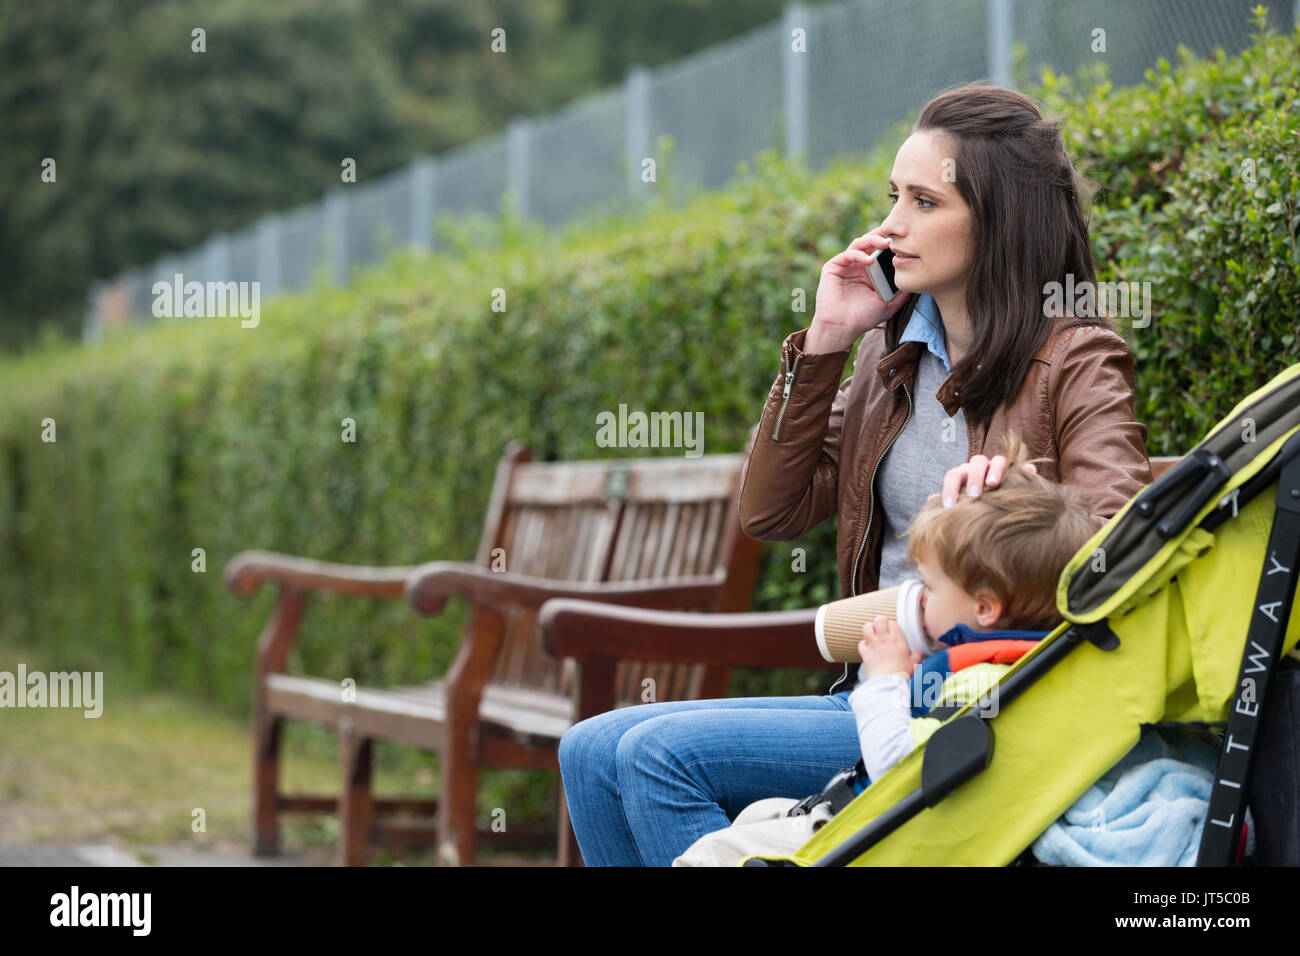 Busy Mother using mobile phone with toddler sitting in pram. Stock Photo